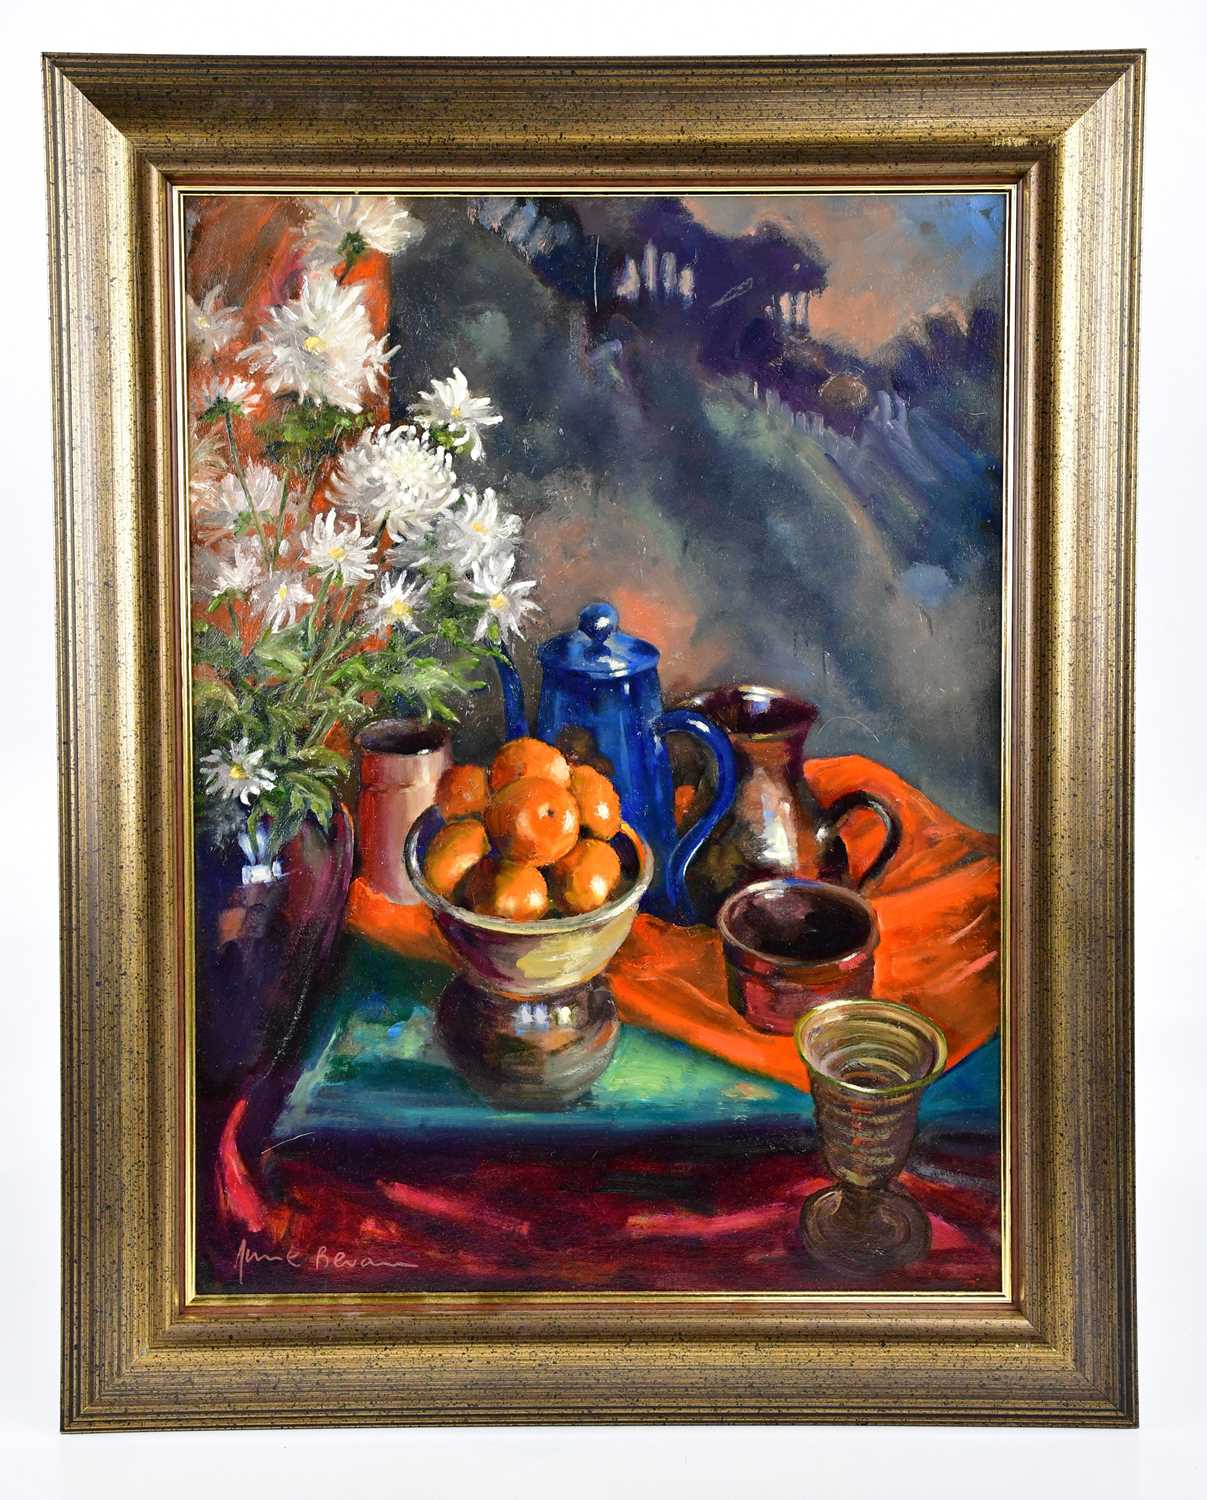 † JUNE BEVAN; oil on board, 'White Chrysanthemums, Clementines and Blue Teapot', signed lower